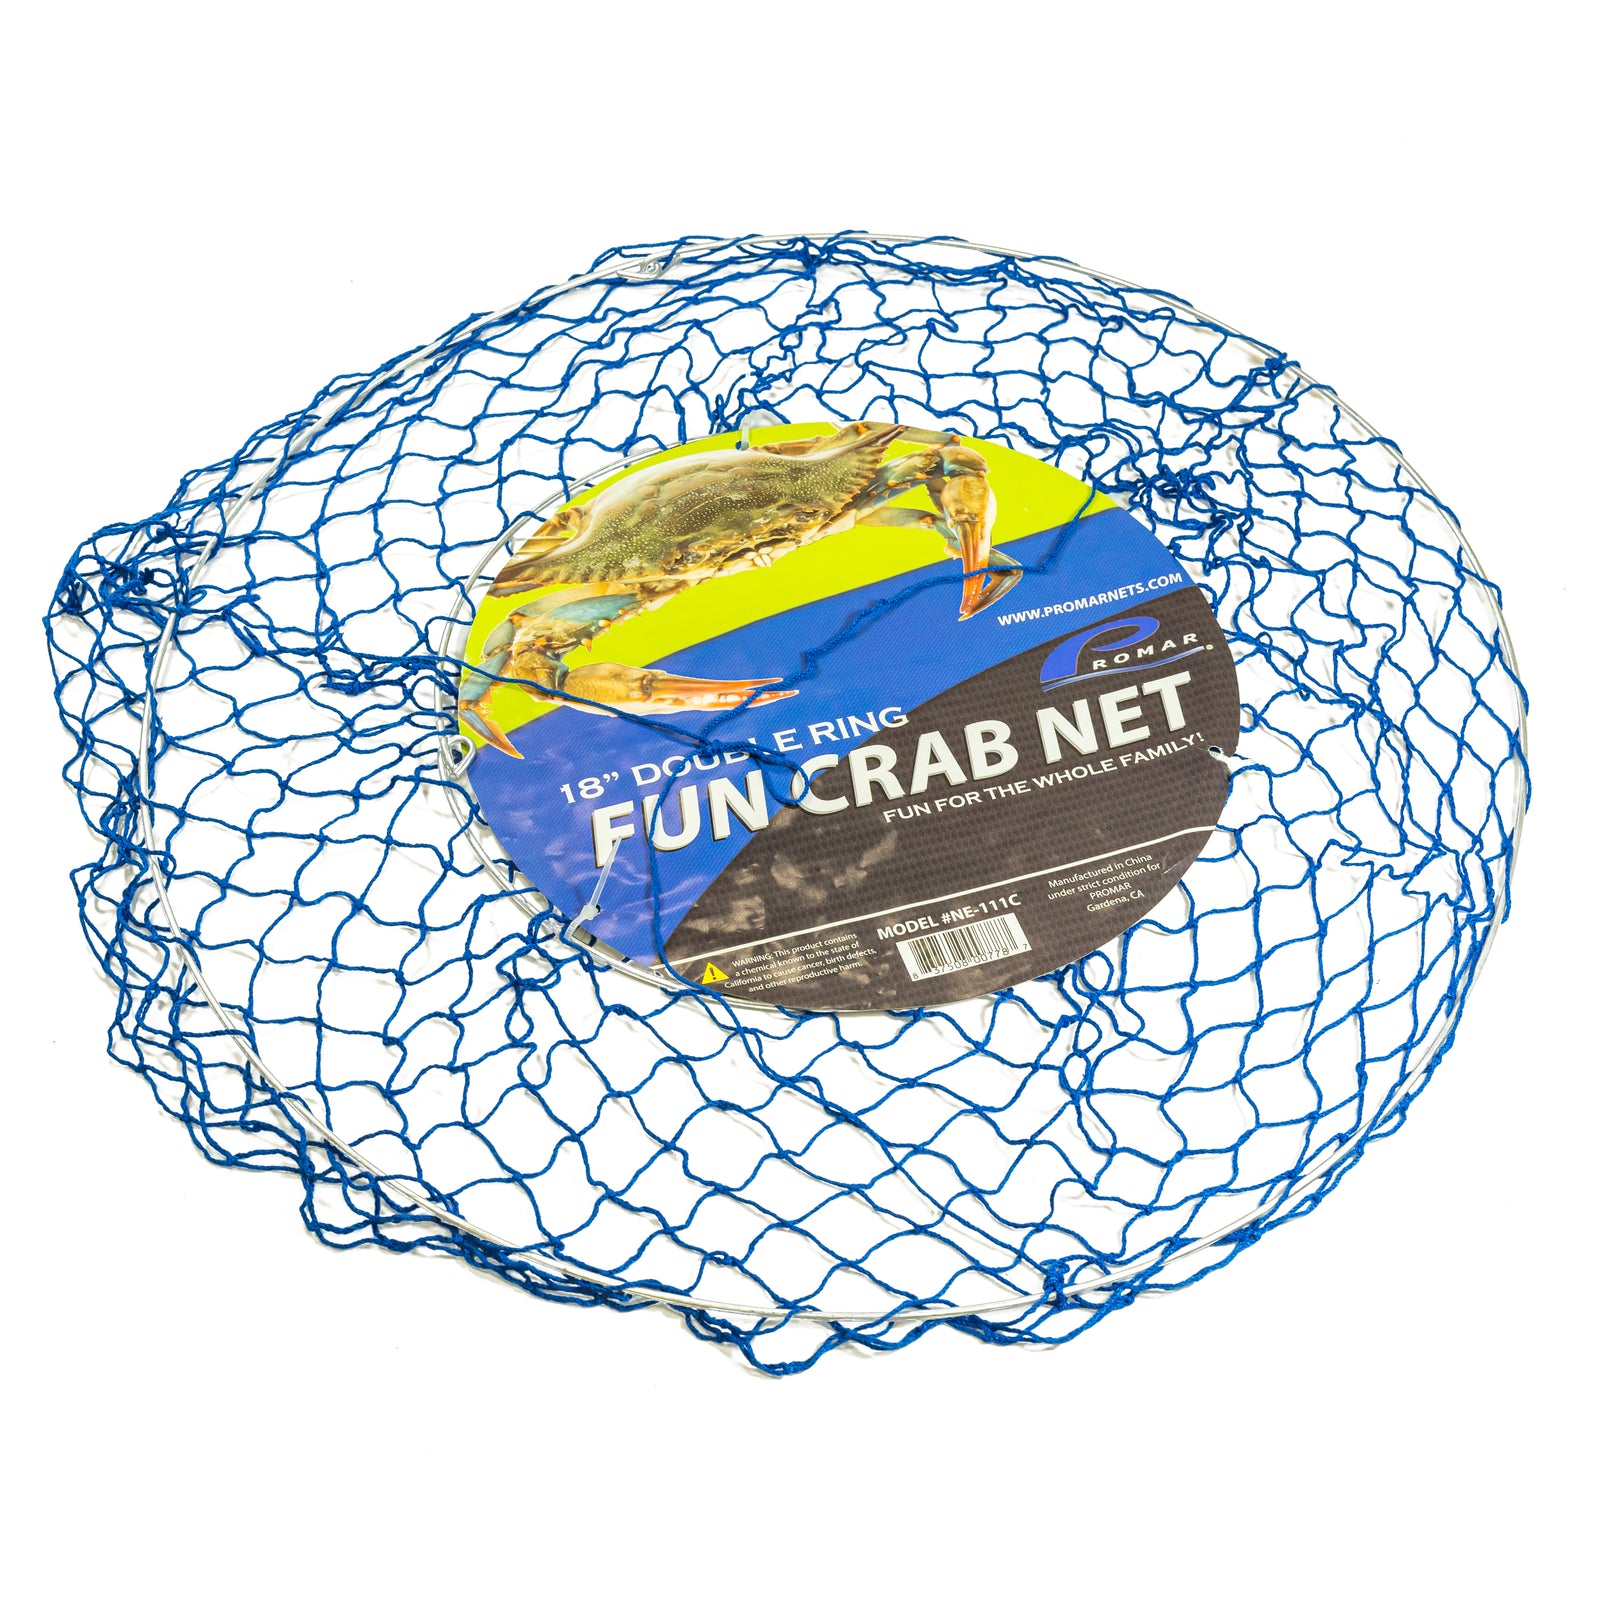 Traps and Hoop Nets Tagged ring net - Promar & Ahi USA